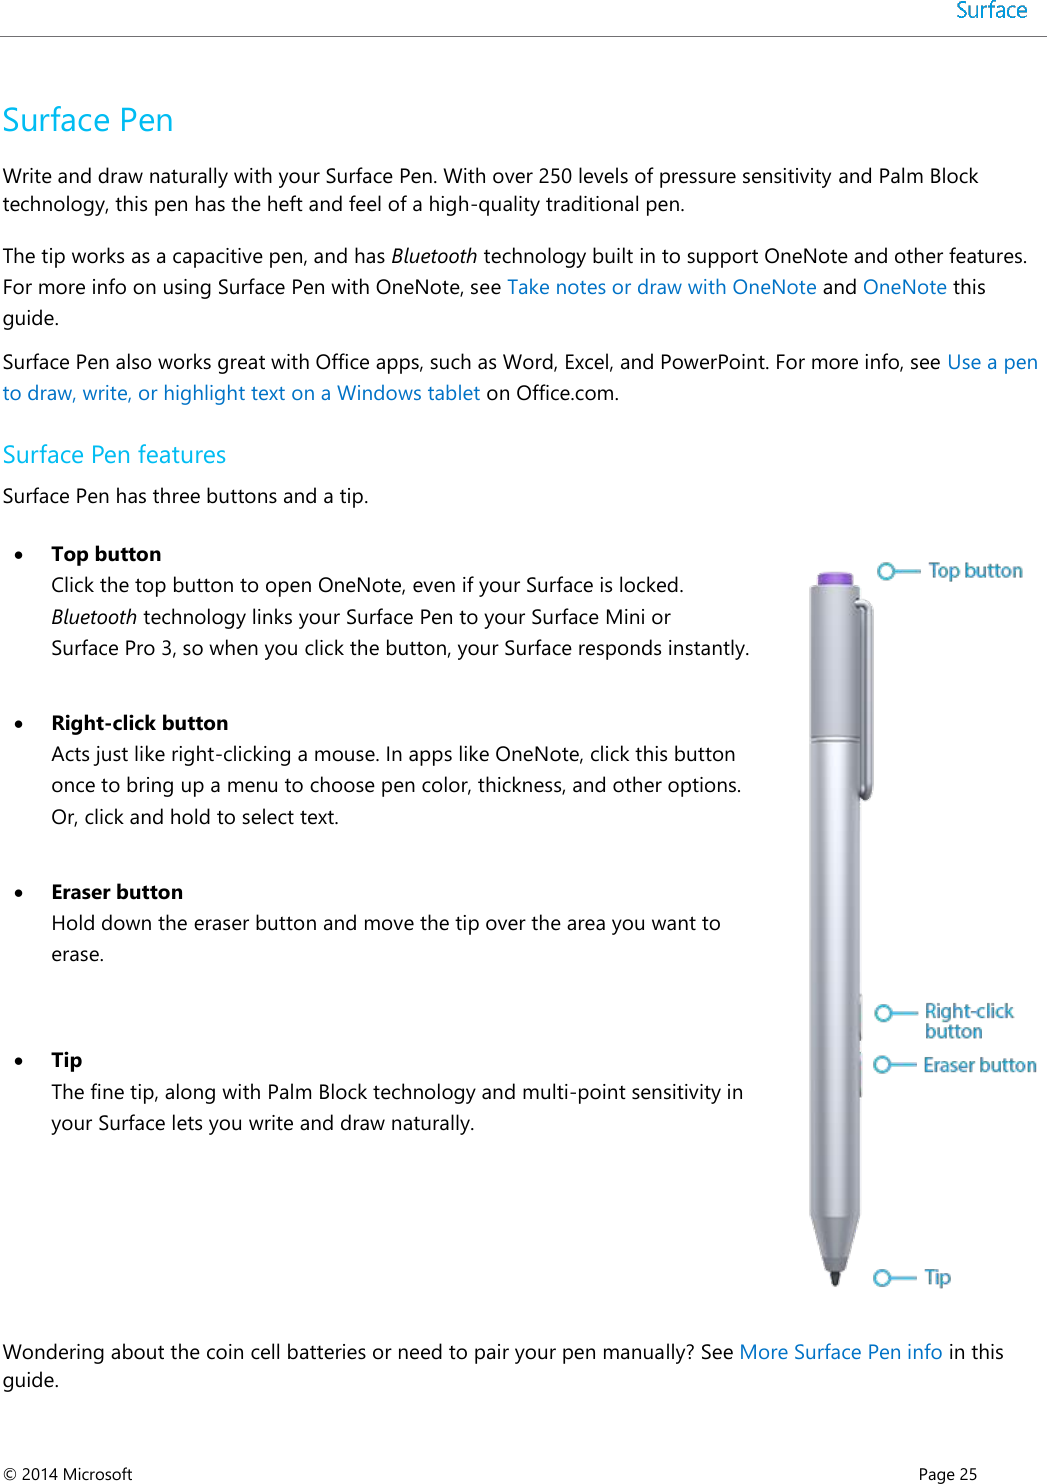  © 2014 Microsoft      Page 25  Surface Pen Write and draw naturally with your Surface Pen. With over 250 levels of pressure sensitivity and Palm Block technology, this pen has the heft and feel of a high-quality traditional pen. The tip works as a capacitive pen, and has Bluetooth technology built in to support OneNote and other features. For more info on using Surface Pen with OneNote, see Take notes or draw with OneNote and OneNote this guide. Surface Pen also works great with Office apps, such as Word, Excel, and PowerPoint. For more info, see Use a pen to draw, write, or highlight text on a Windows tablet on Office.com. Surface Pen features Surface Pen has three buttons and a tip.   Top button Click the top button to open OneNote, even if your Surface is locked. Bluetooth technology links your Surface Pen to your Surface Mini or Surface Pro 3, so when you click the button, your Surface responds instantly.     Right-click button Acts just like right-clicking a mouse. In apps like OneNote, click this button once to bring up a menu to choose pen color, thickness, and other options. Or, click and hold to select text.  Eraser button Hold down the eraser button and move the tip over the area you want to erase.  Tip The fine tip, along with Palm Block technology and multi-point sensitivity in your Surface lets you write and draw naturally.   Wondering about the coin cell batteries or need to pair your pen manually? See More Surface Pen info in this guide. 